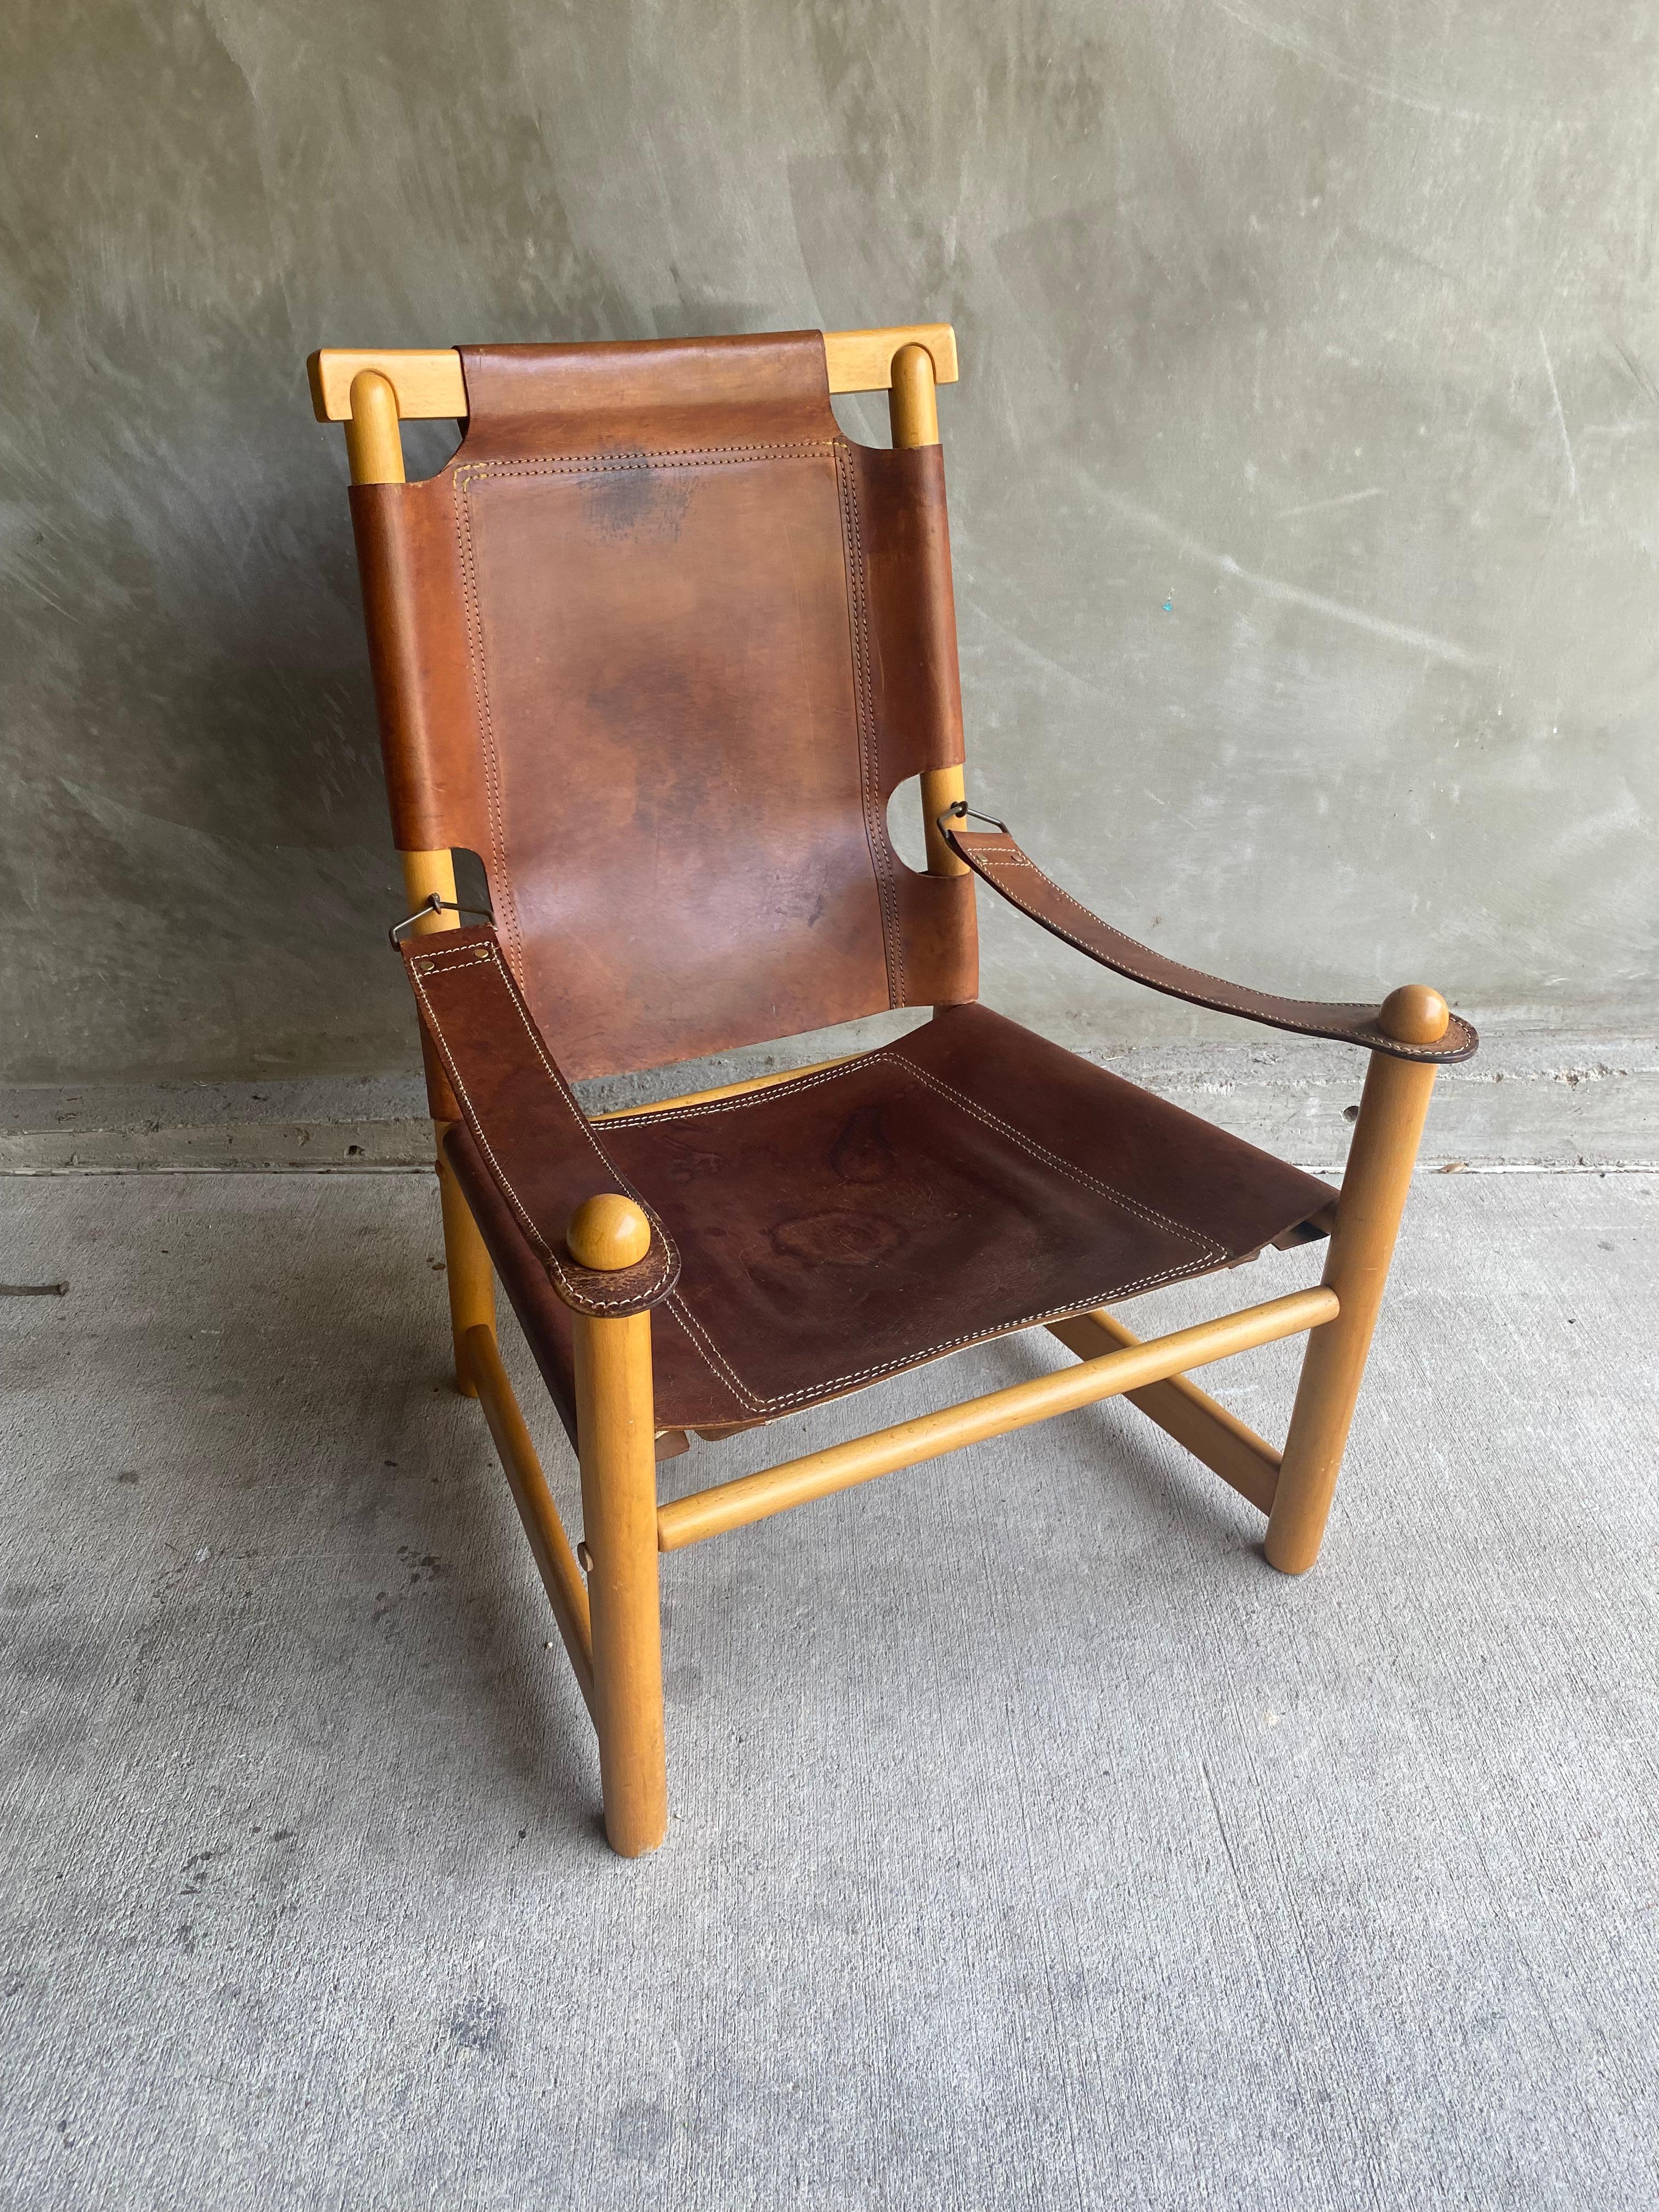 Handsome cognac and beech sling chair with unique details at arms and back.  Comfortable as is or with the addition of a seat cushion.  Style of Bernini, Italy, 1960's.